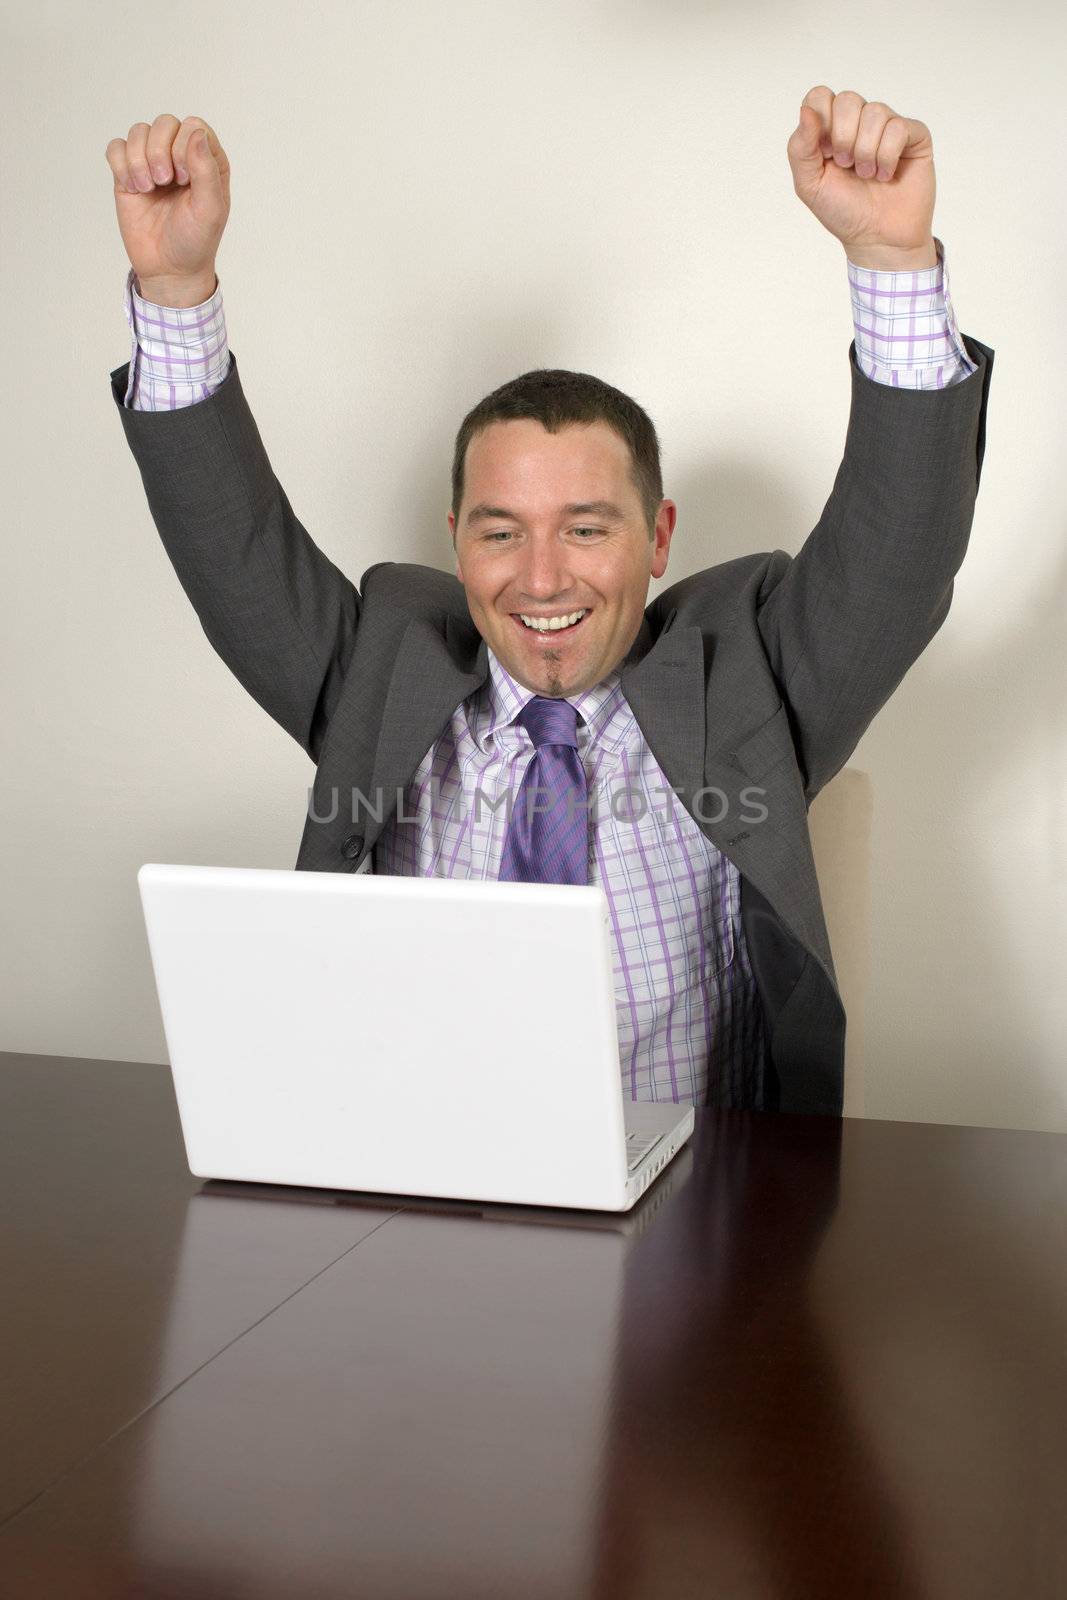 Happy businessman in his thirties looks at his success on his laptop.
